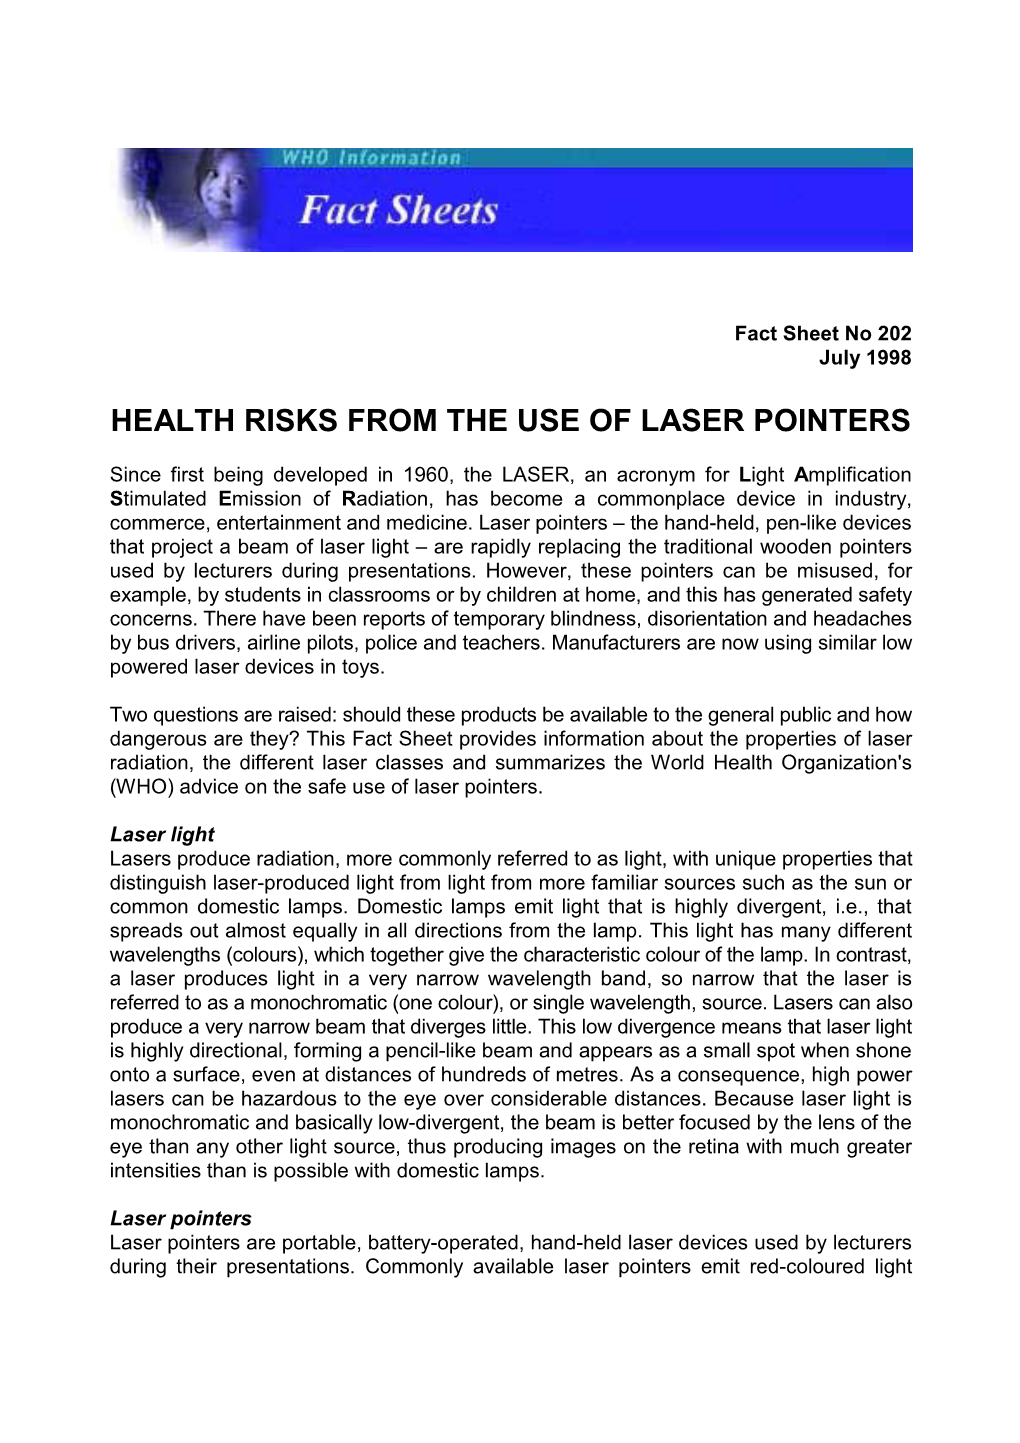 Health Risks from the Use of Laser Pointers